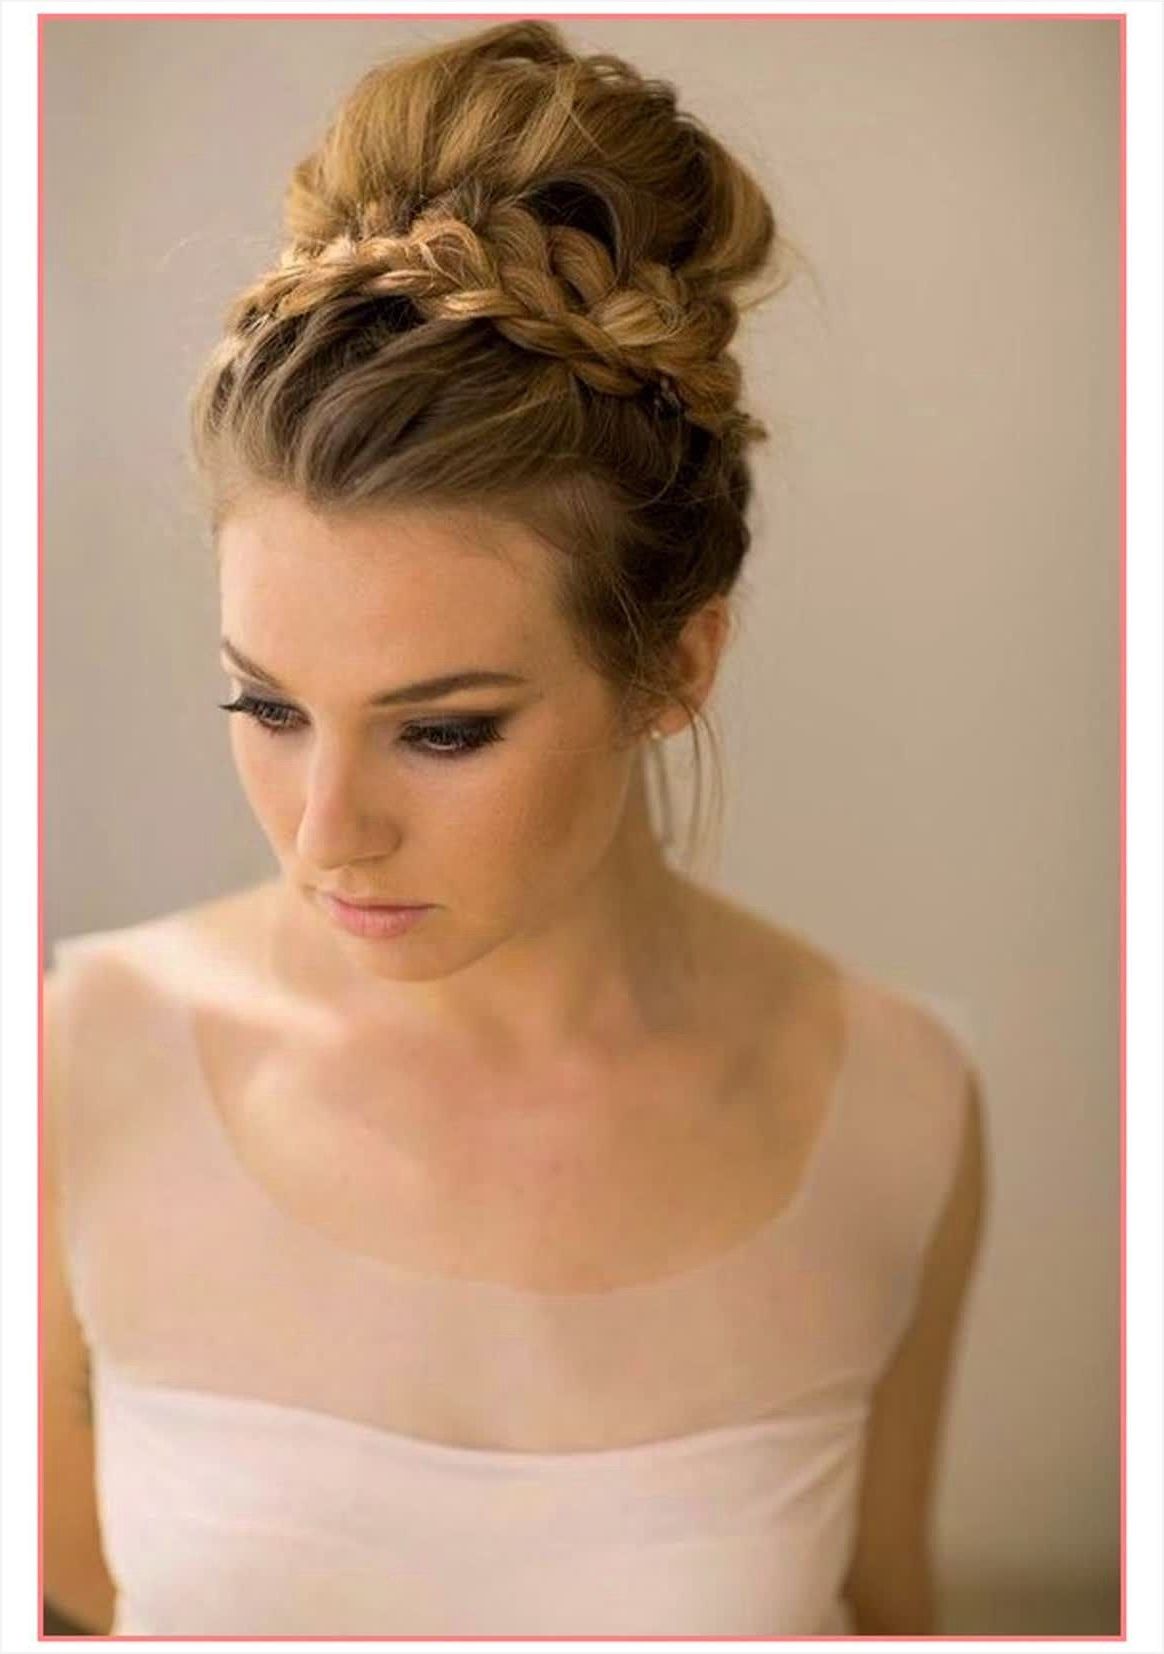 41 Cute Hairstyles For Wedding Guests | Hair | Pinterest | Wedding Regarding Hairstyles For Short Hair For Wedding Guest (View 13 of 25)